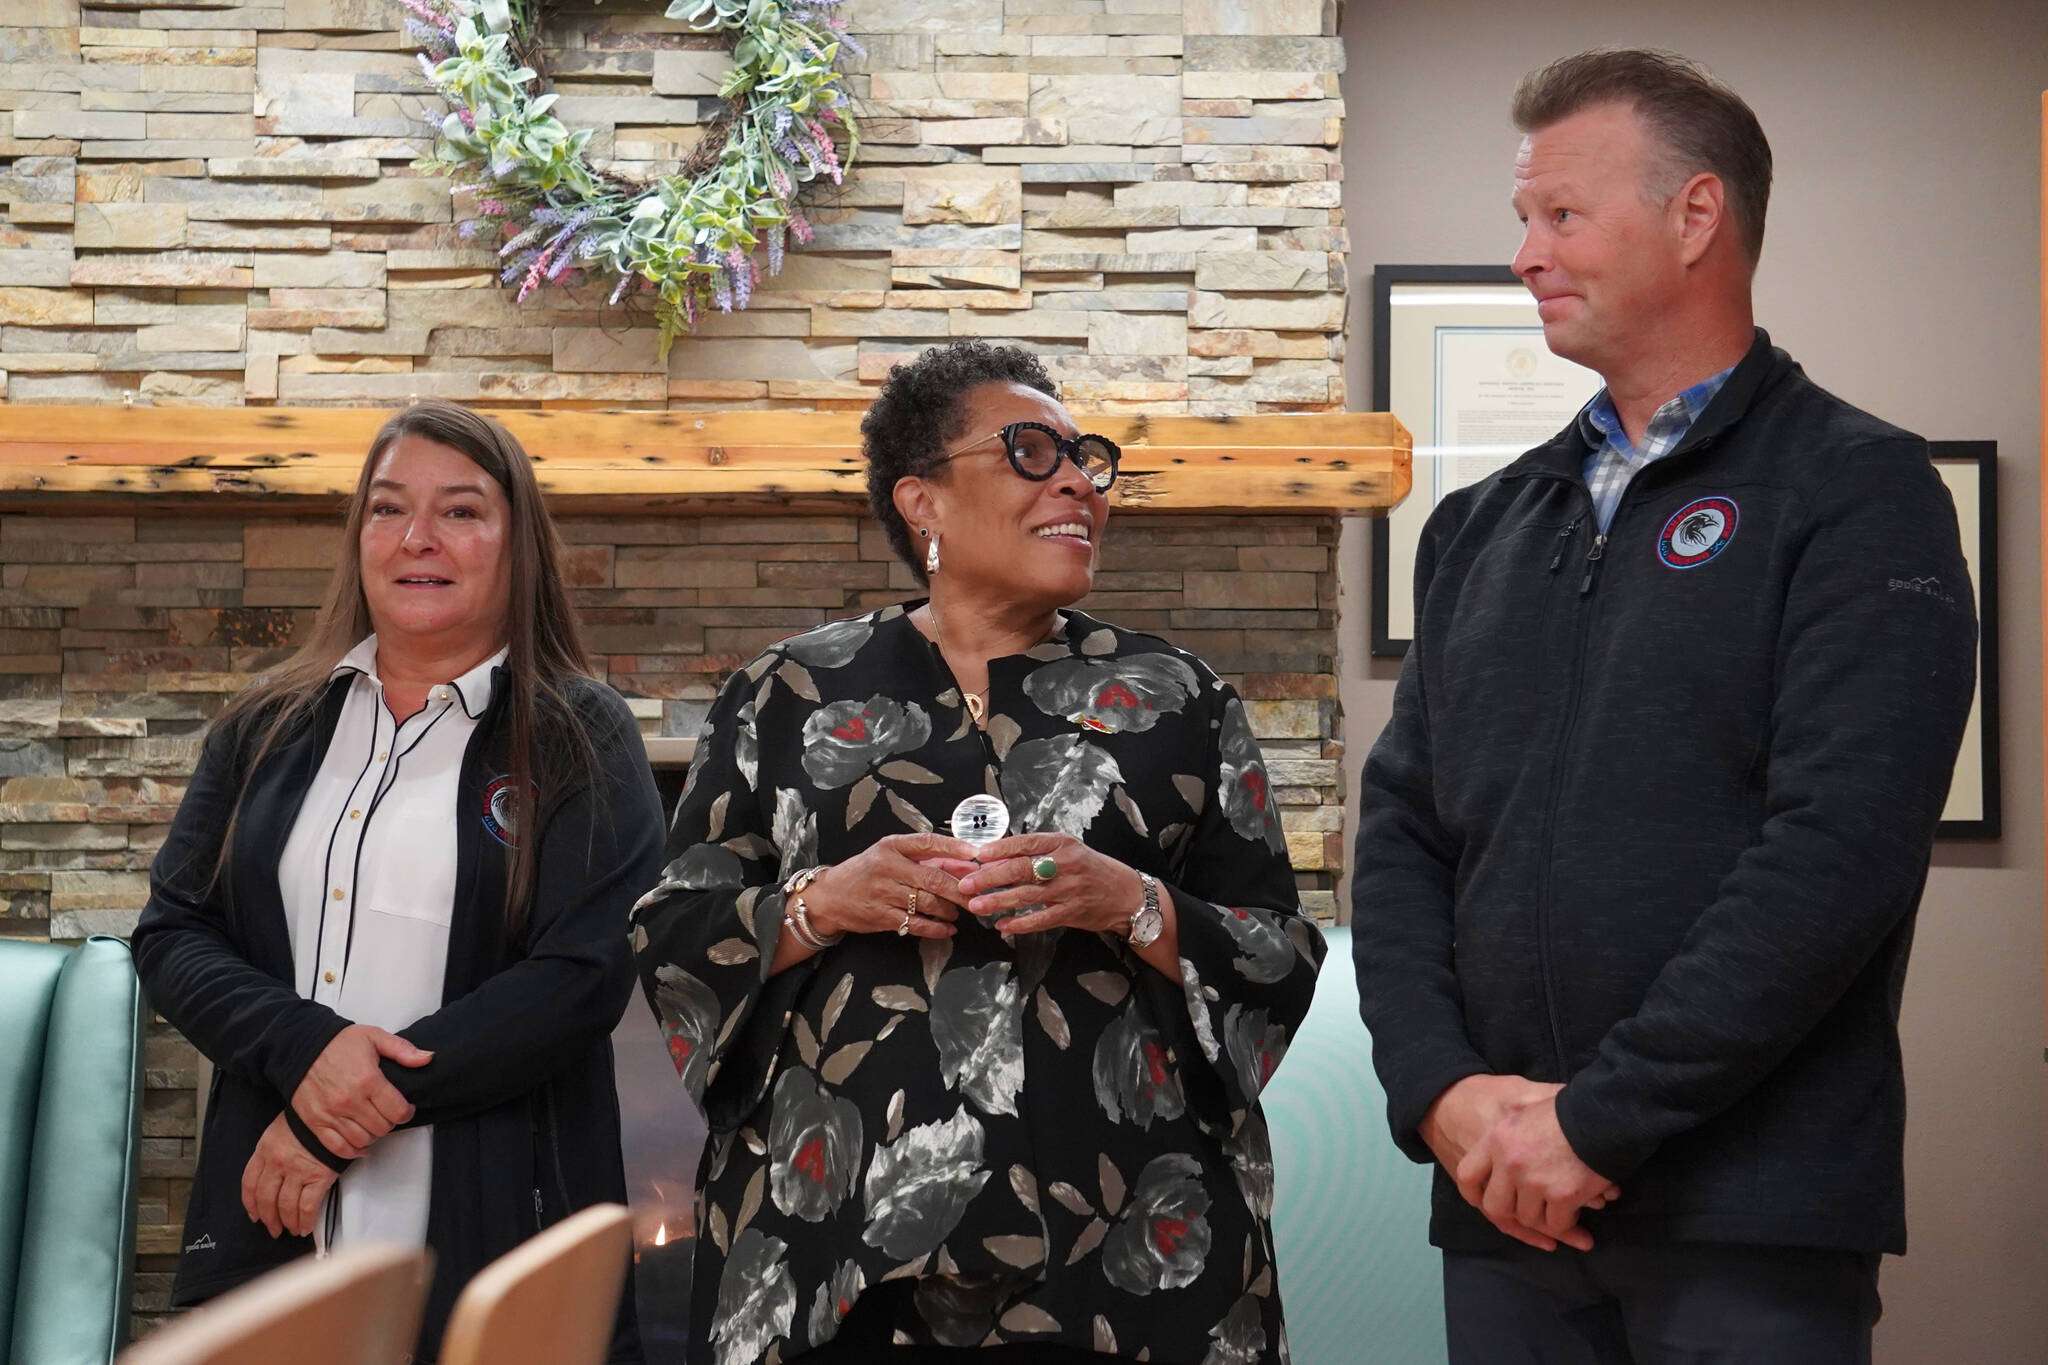 U.S. Department of Housing and Urban Development Secretary Marcia L. Fudge, center, is joined by Kenaitze Indian Tribe Tribal Council Chair Ronette Stanton and Kenaitze/Salamatof Tribally Designated Housing Entity Chair Kaarlo Wik on a visit to the Tyotkas Elder Center in Kenai, Alaska, on Wednesday, Aug. 30, 2023. (Jake Dye/Peninsula Clarion)